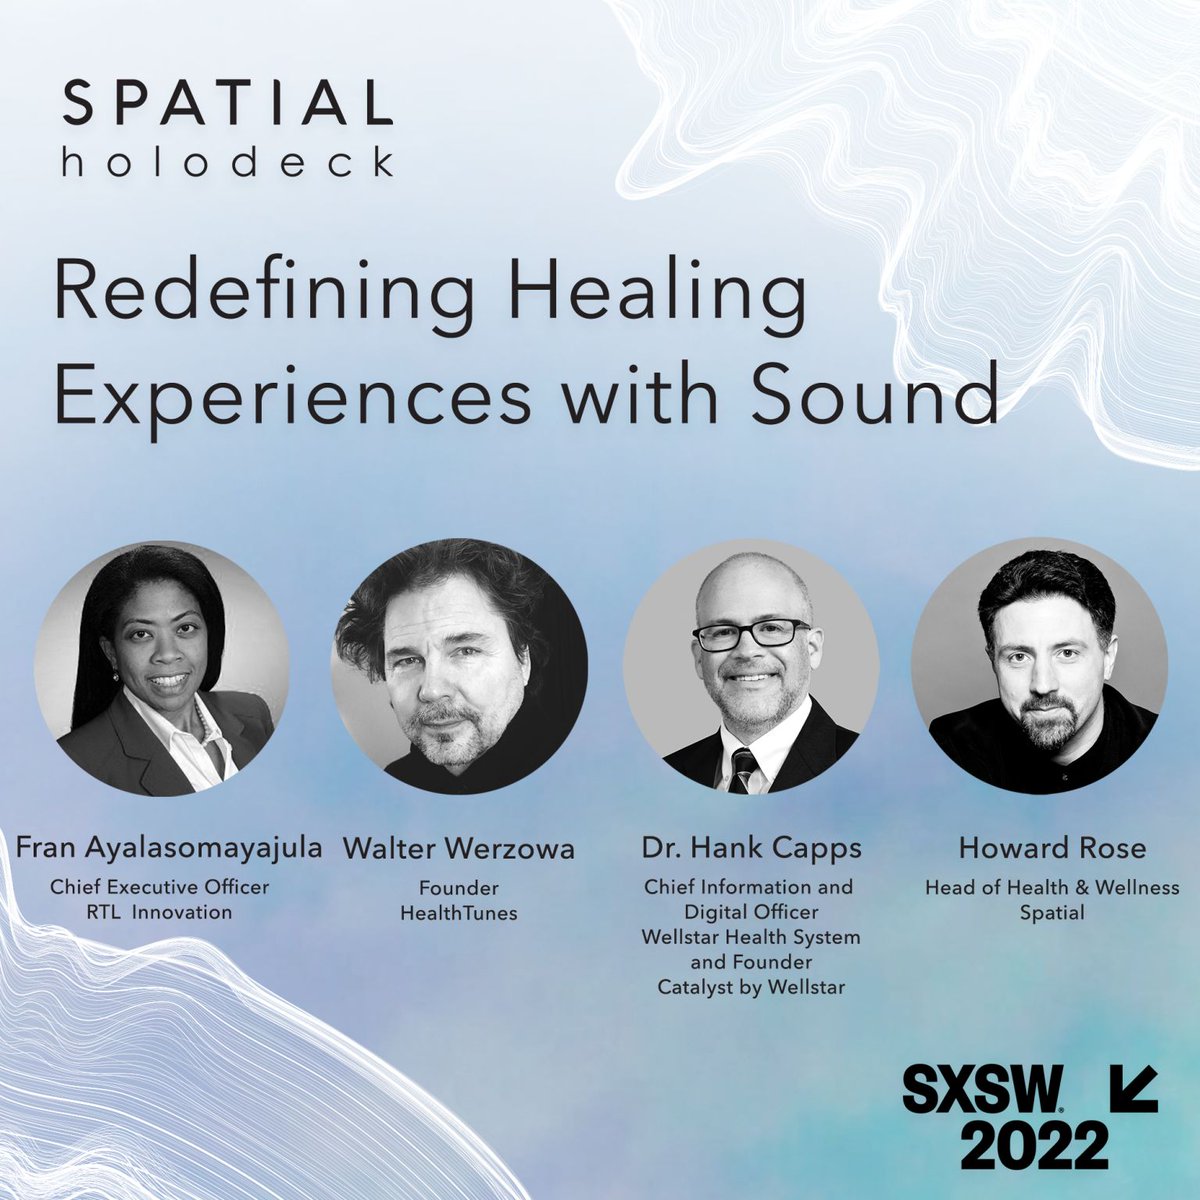 Don’t miss Walter this weekend at the Sunset Room as he joins a panel on the topic of “Redefining Healing Experiences with Sound” Click for more info: bit.ly/SXSW22HealthTu… #SXSW #SXSW22 #HealthTunes